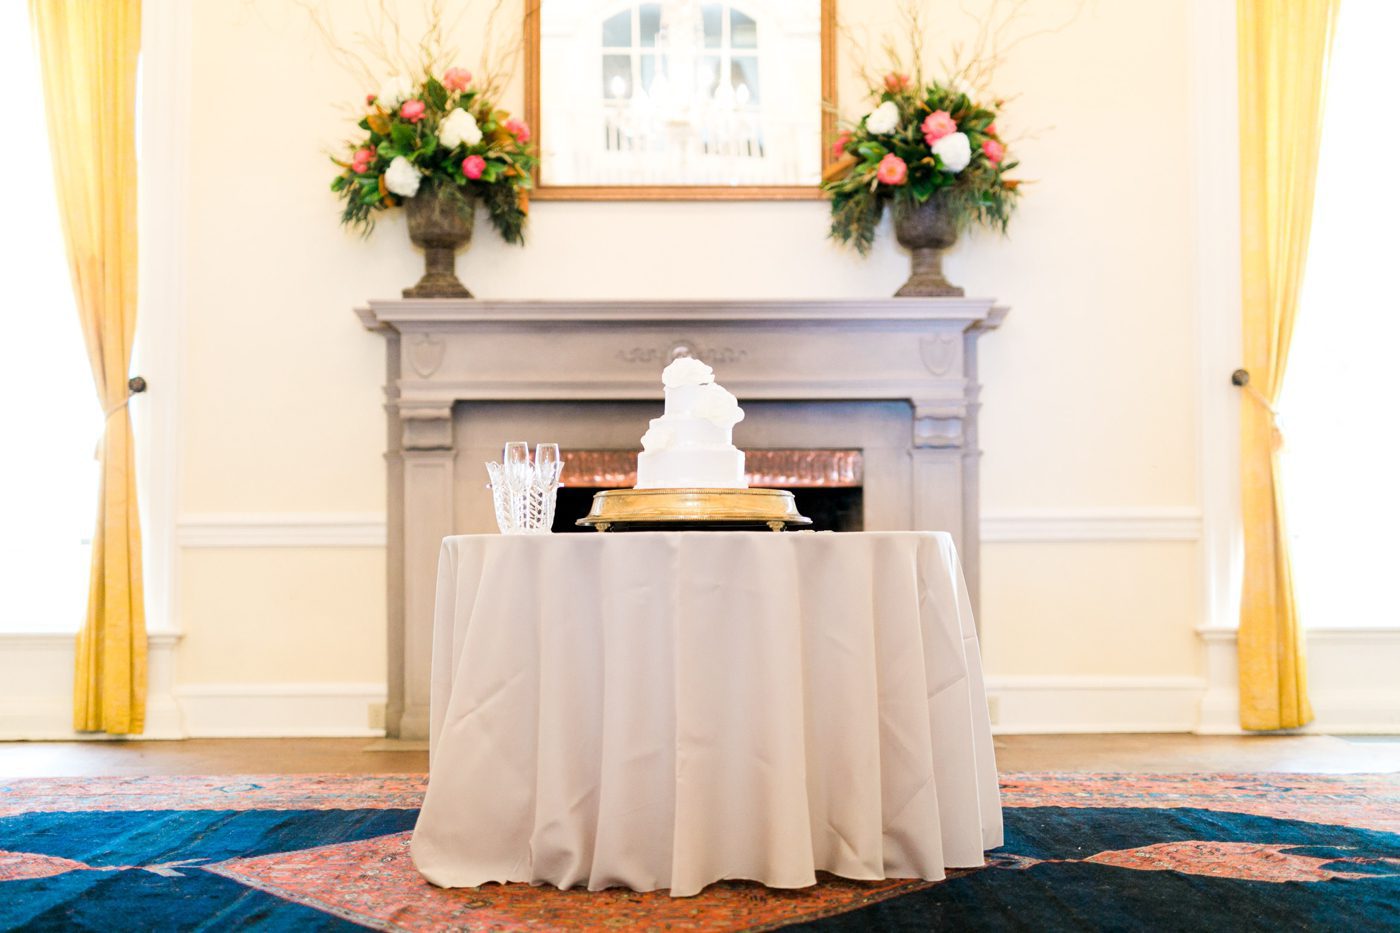 White wedding cake in front of old fireplace. Photo by Charleston wedding photographer Catherine Ann Photography